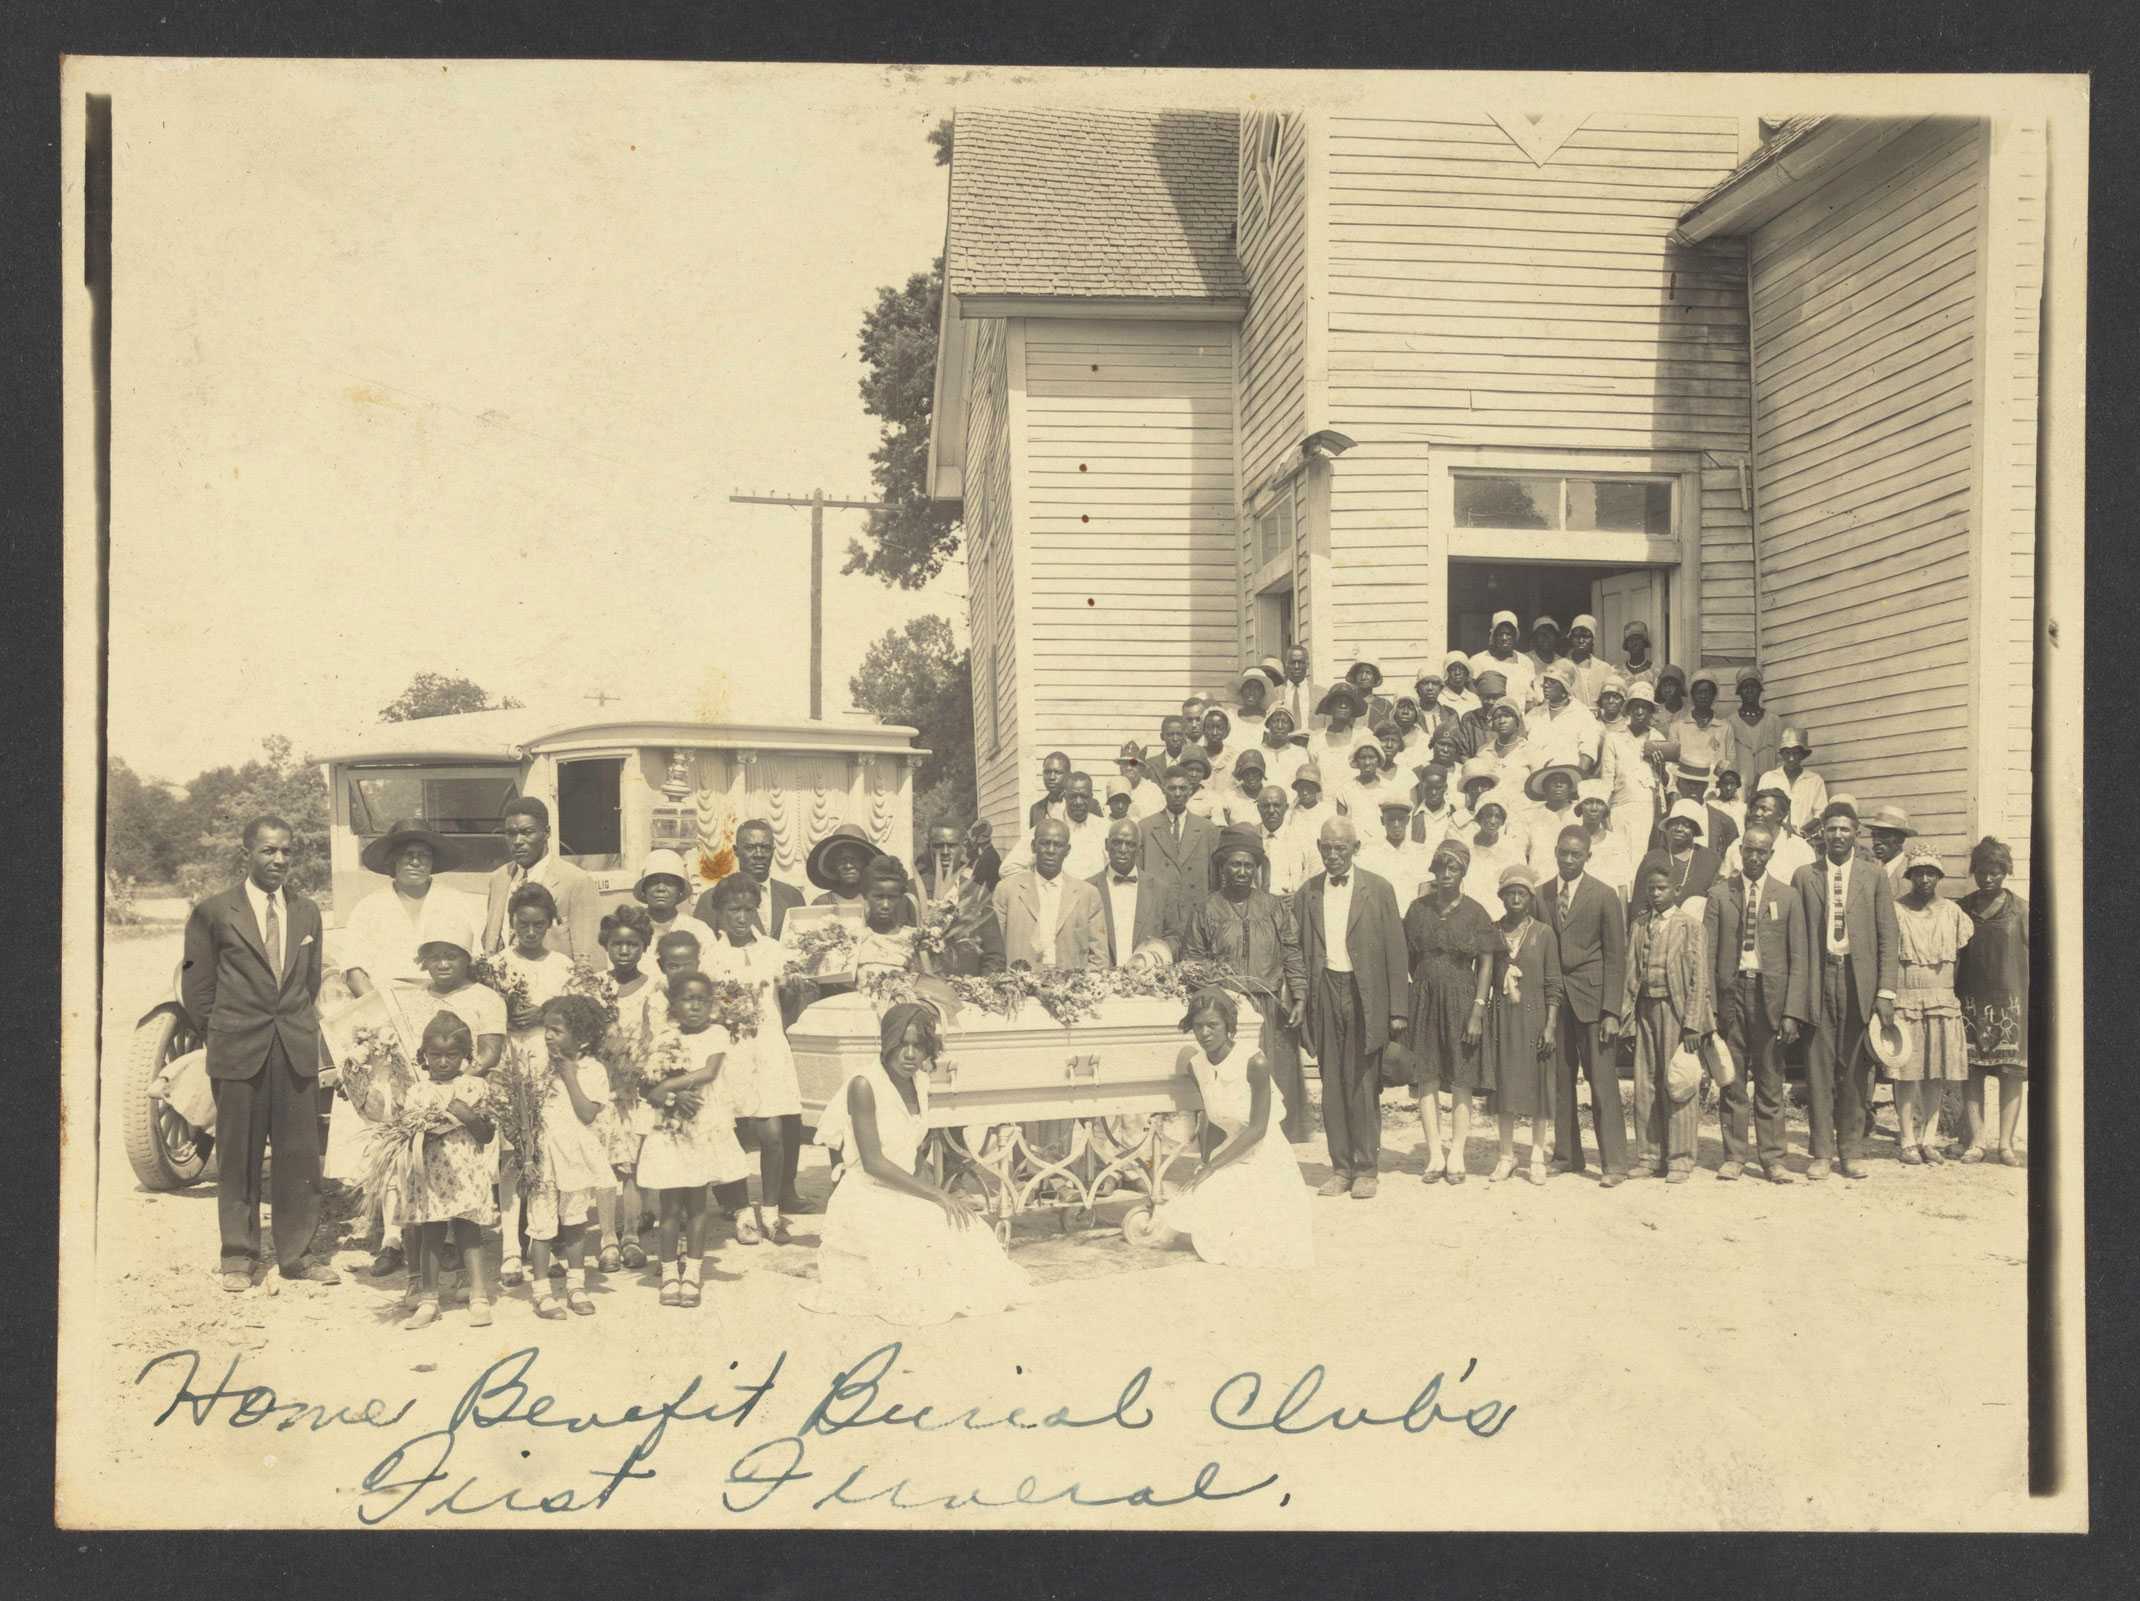 A large group of African Americans taking a photo around a casket for the first funeral in Earle, Arkansas